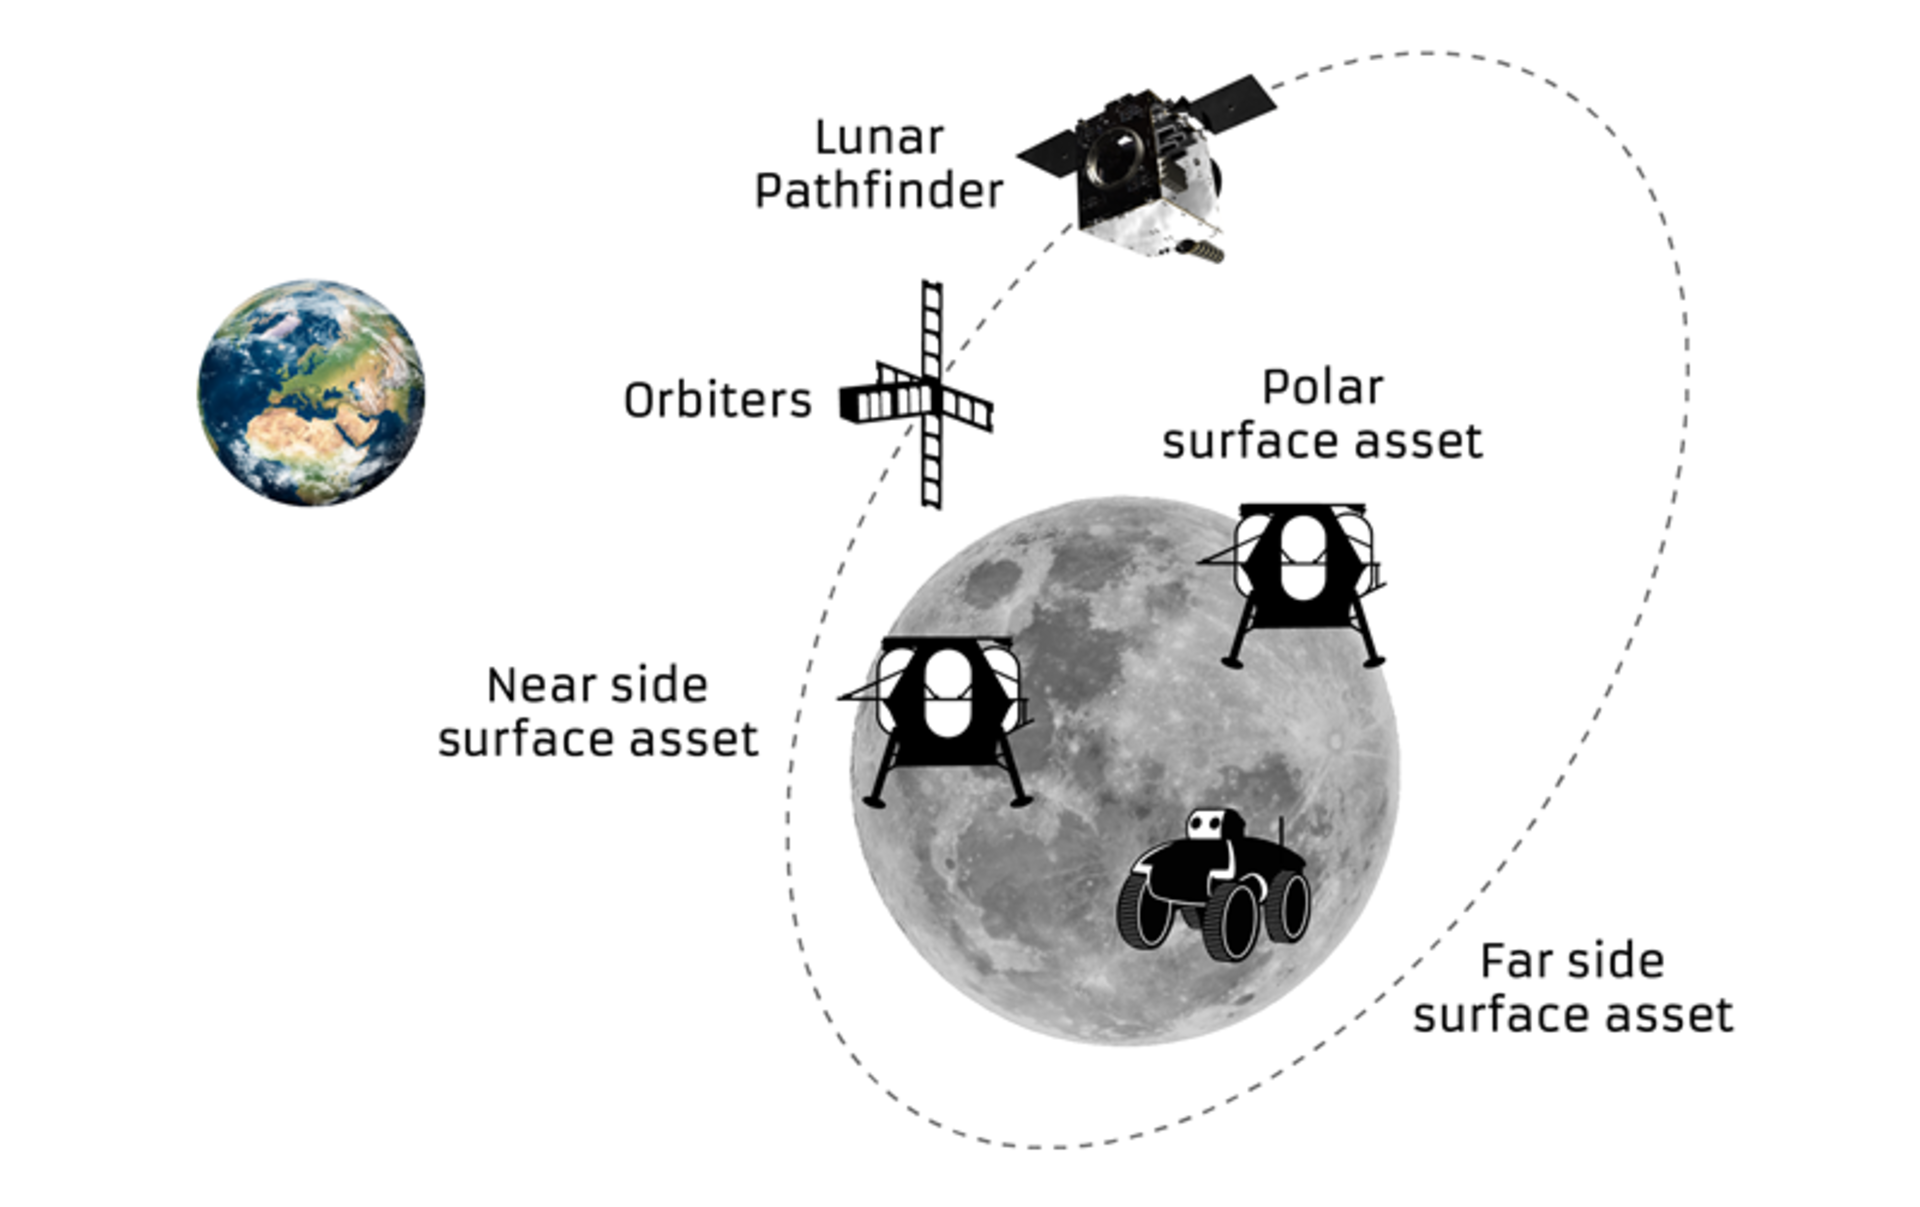 Sonde commerciale Lunar Pathfinder Mission Lunar_Pathfinder_will_relay_communications_from_orbital_and_surface_missions_pillars